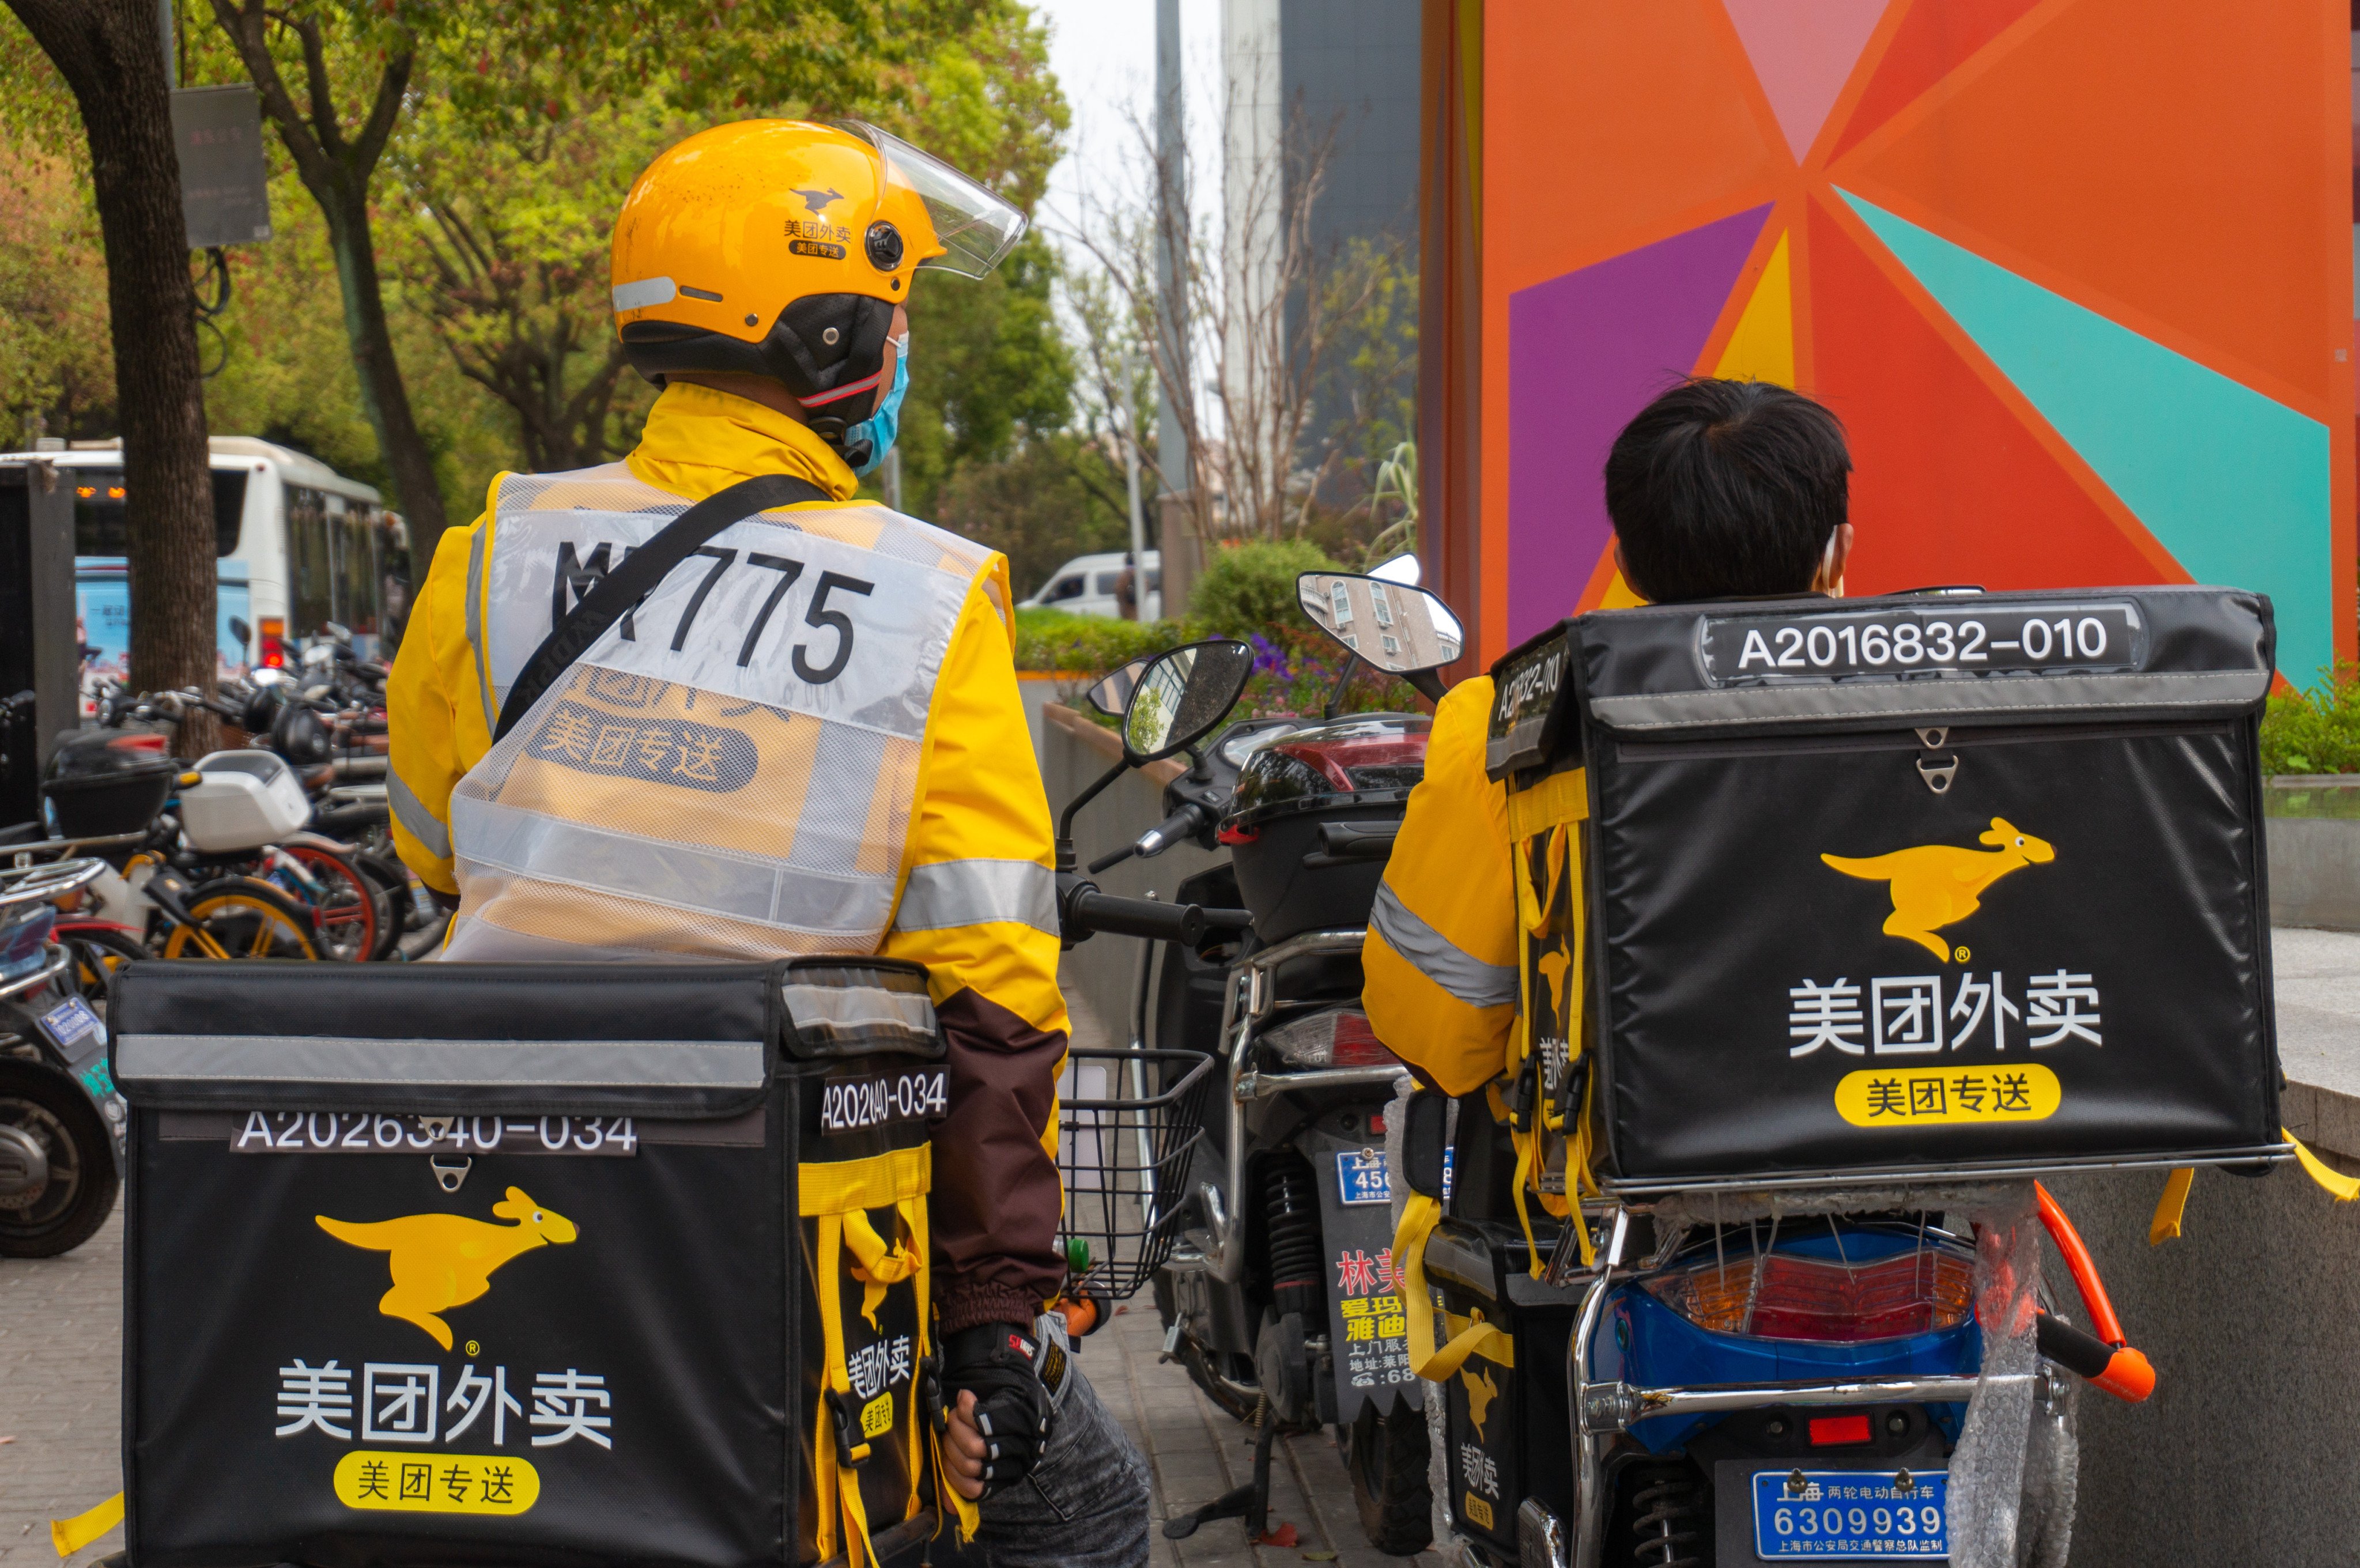 Meituan has announced it will hire delivery workers in Hong Kong. Photo: Shutterstock Images